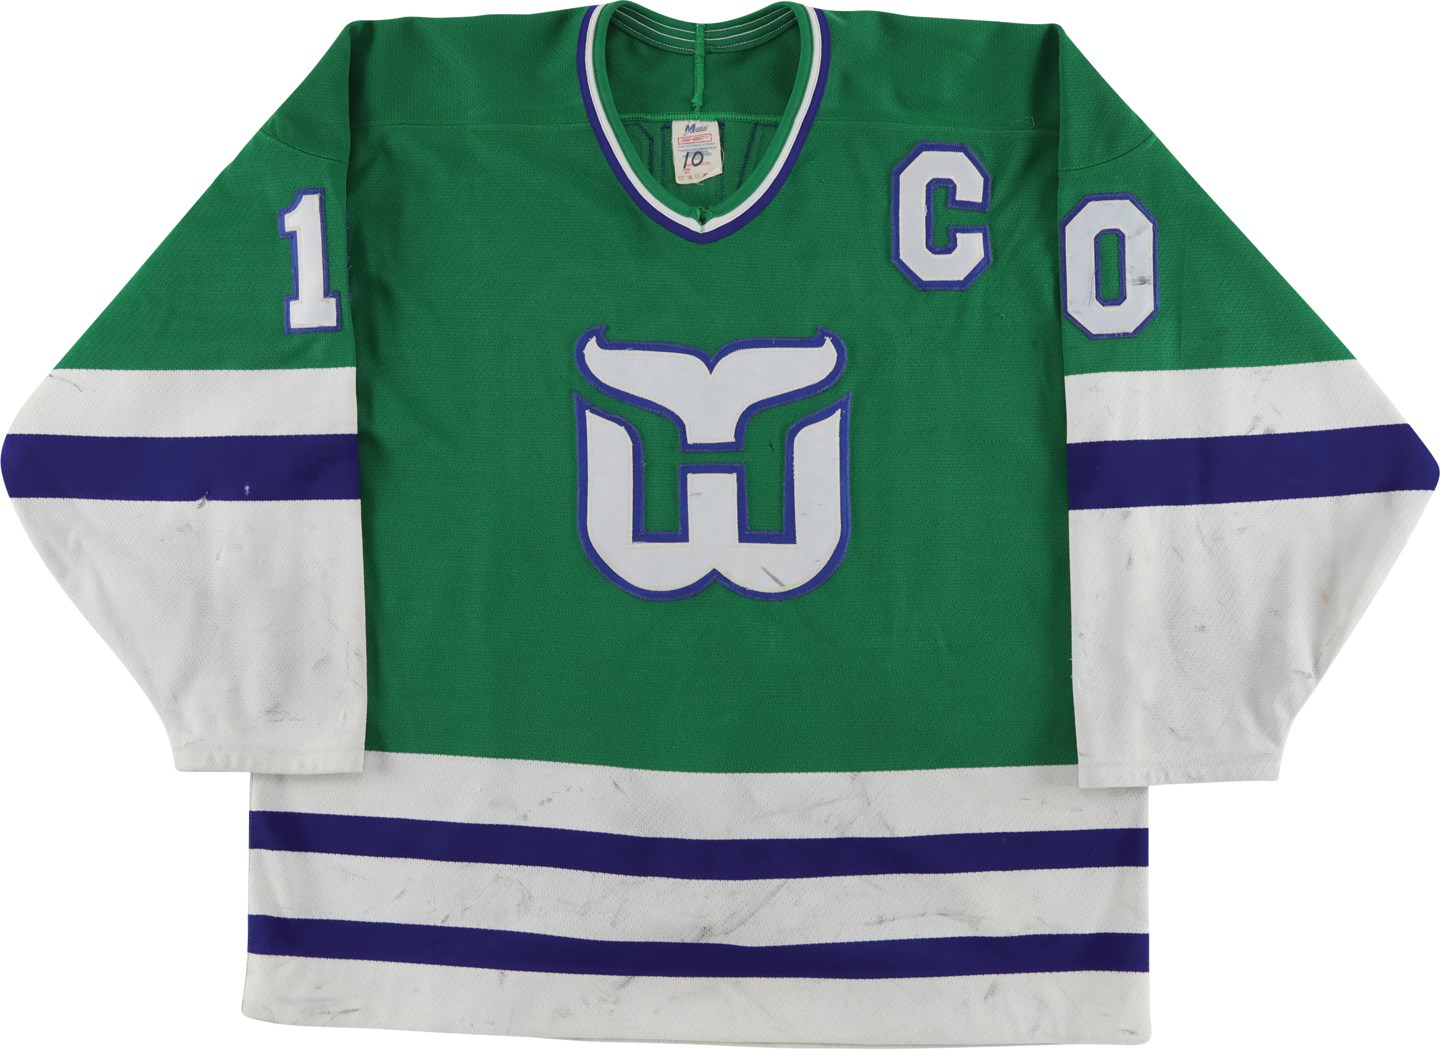 Hockey - 12/15/90 Ron Francis Photo-Matched Hartford Whalers Game Worn Jersey (Photo-Matched)